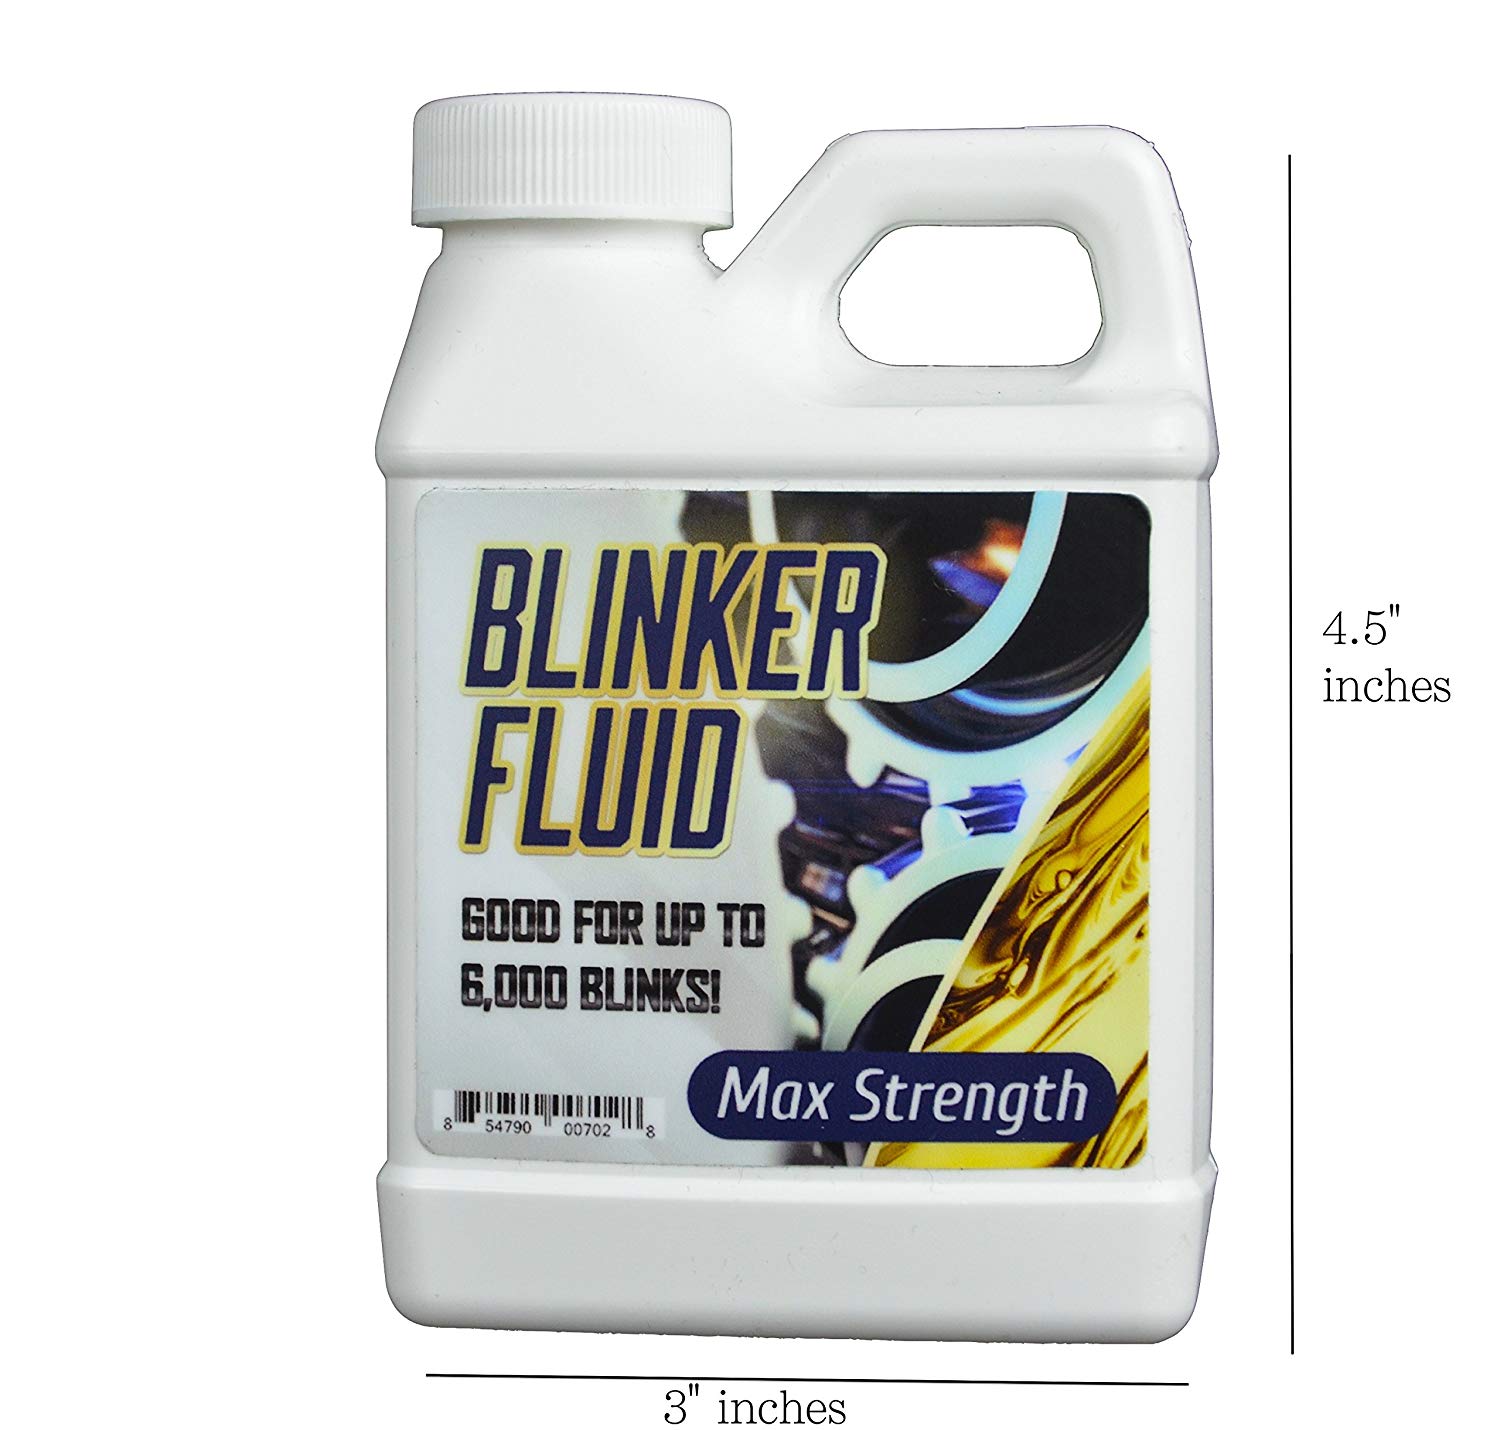 Premium blinker fluid! Works on all makes and models of vehicles. Get it for <a href="https://amzn.to/2Sd3mQi">$8.95</a>.